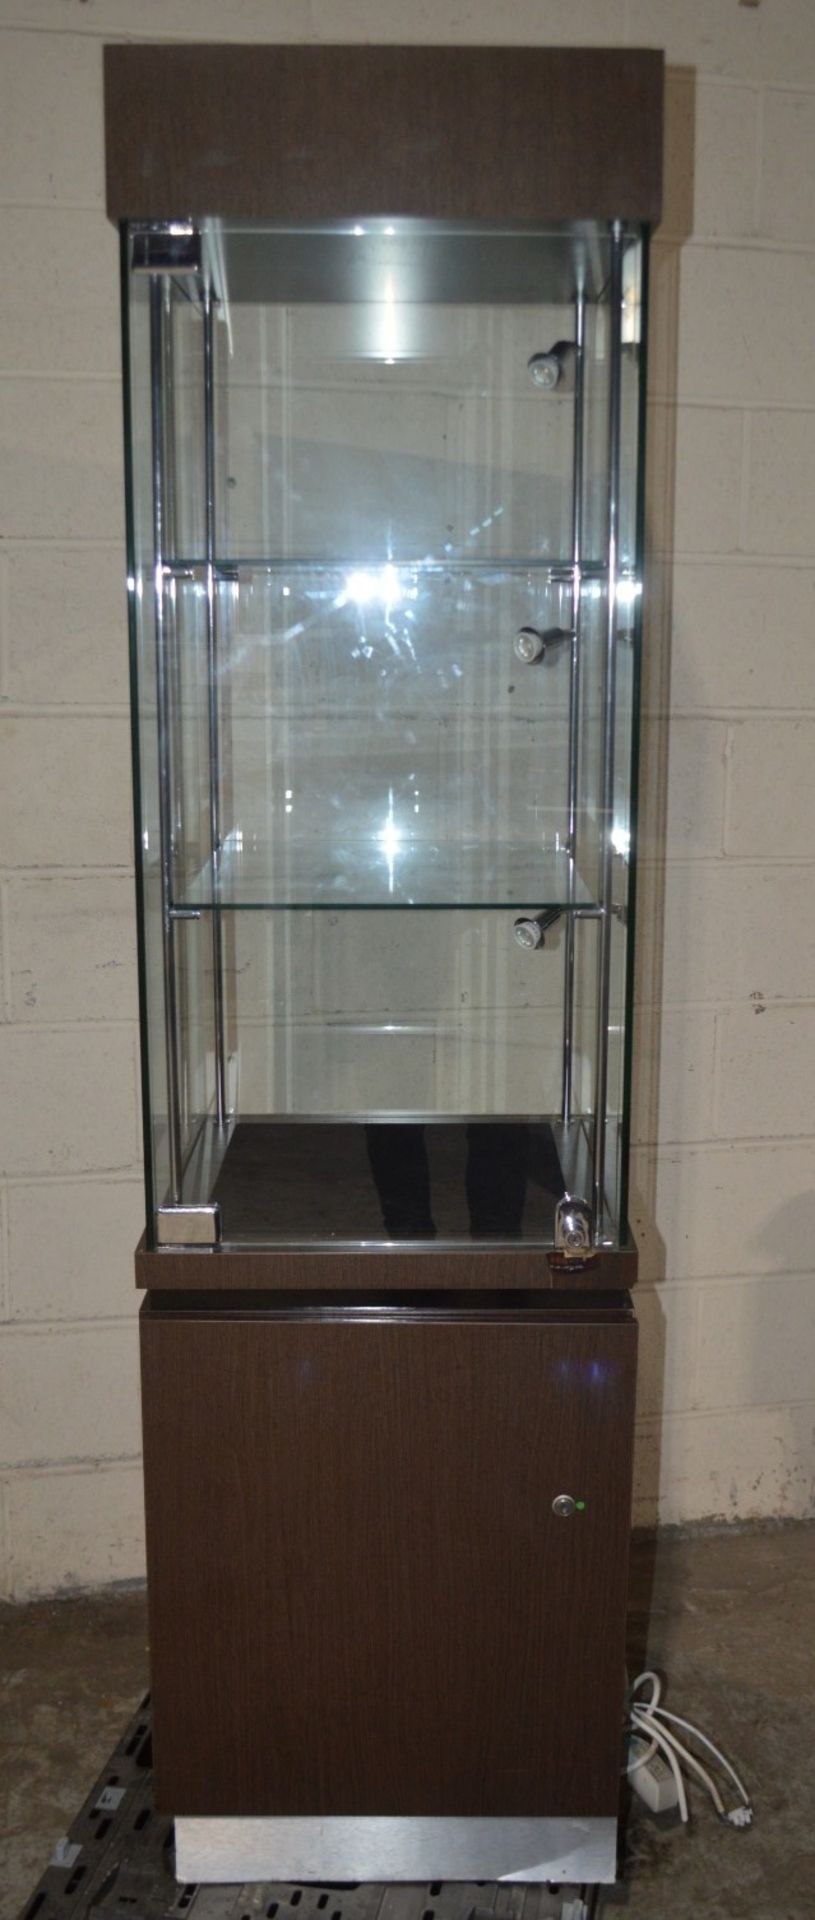 1 x Lockable Illuminated Display Case - Dimensions: H186 x W50 x D50cm - Unlocked, Without Key - Image 4 of 6